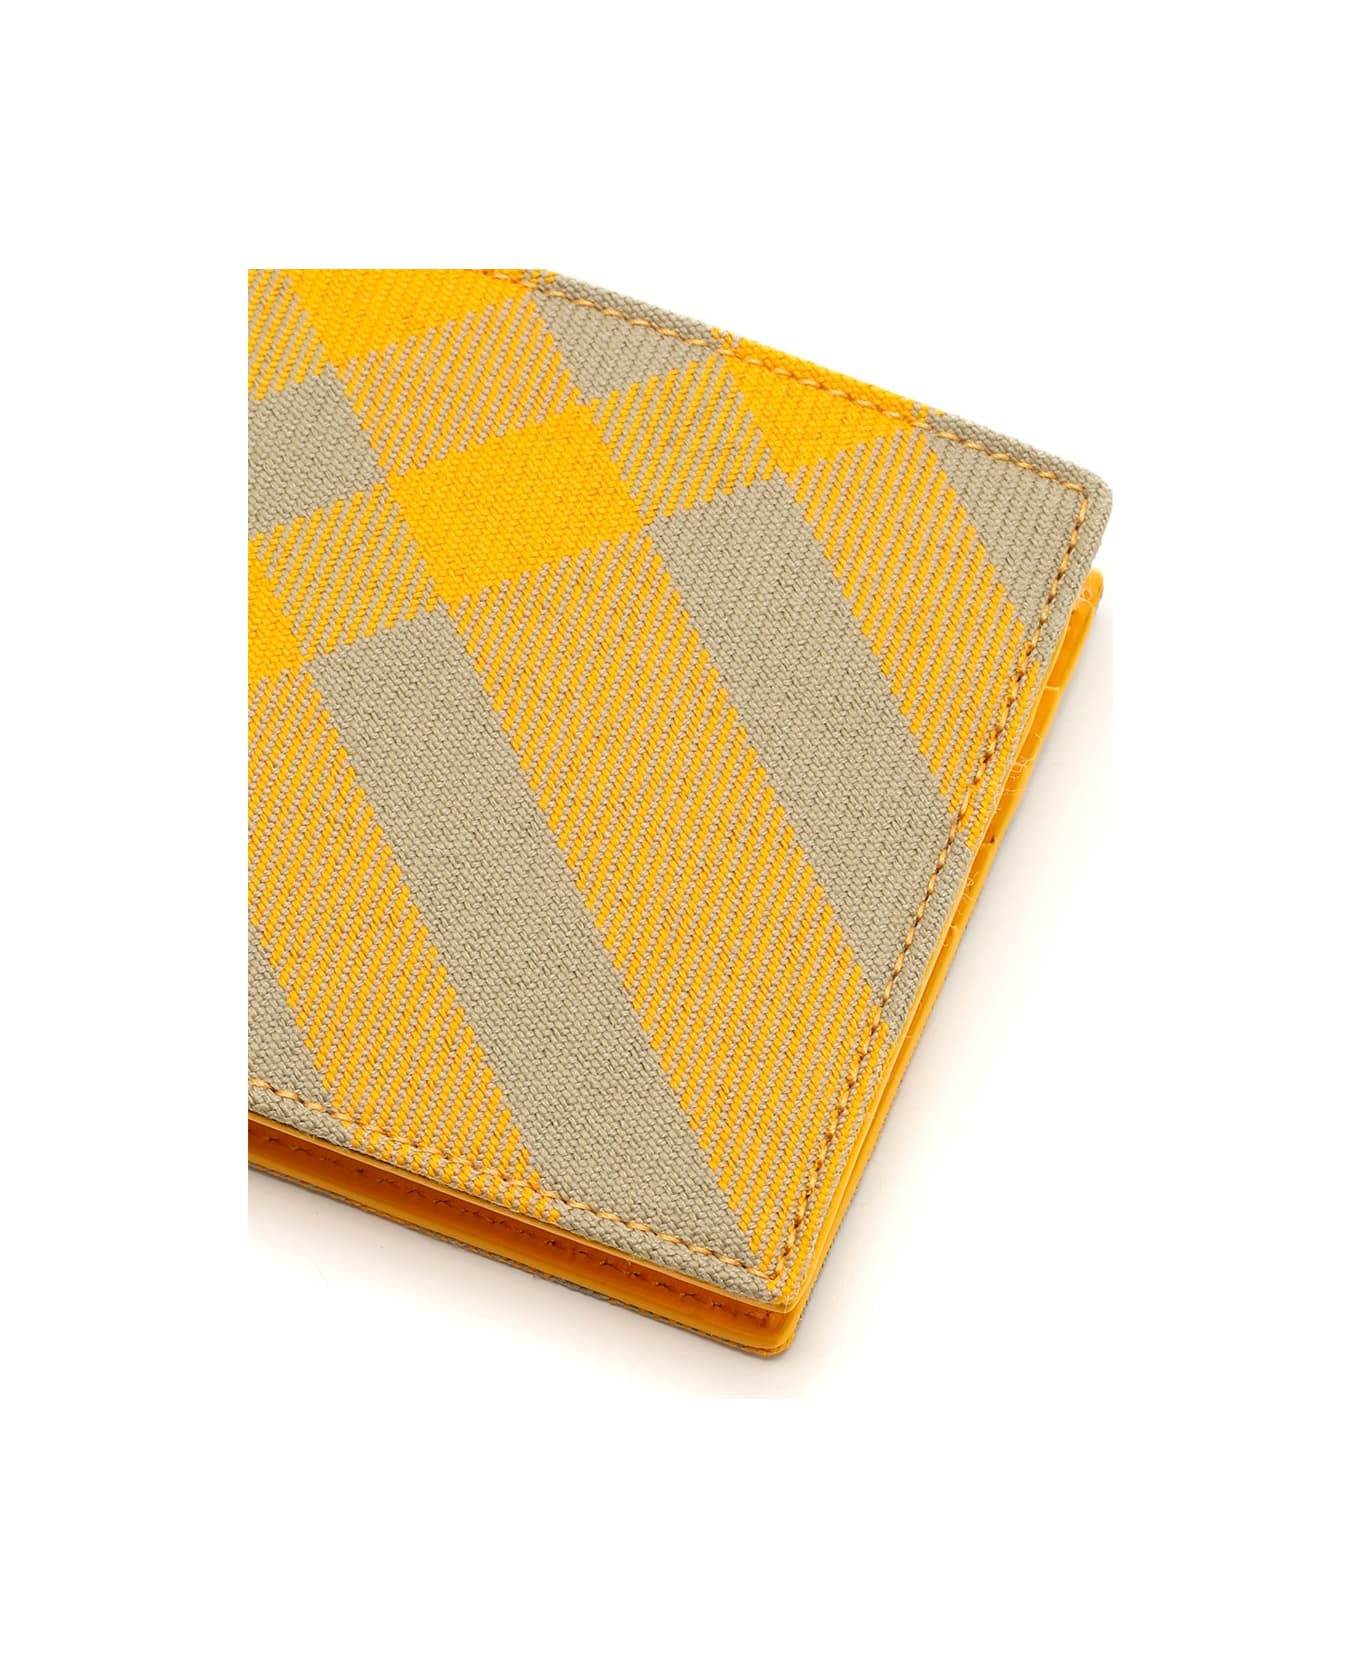 Burberry Wool And Leather Wallet - Yellow